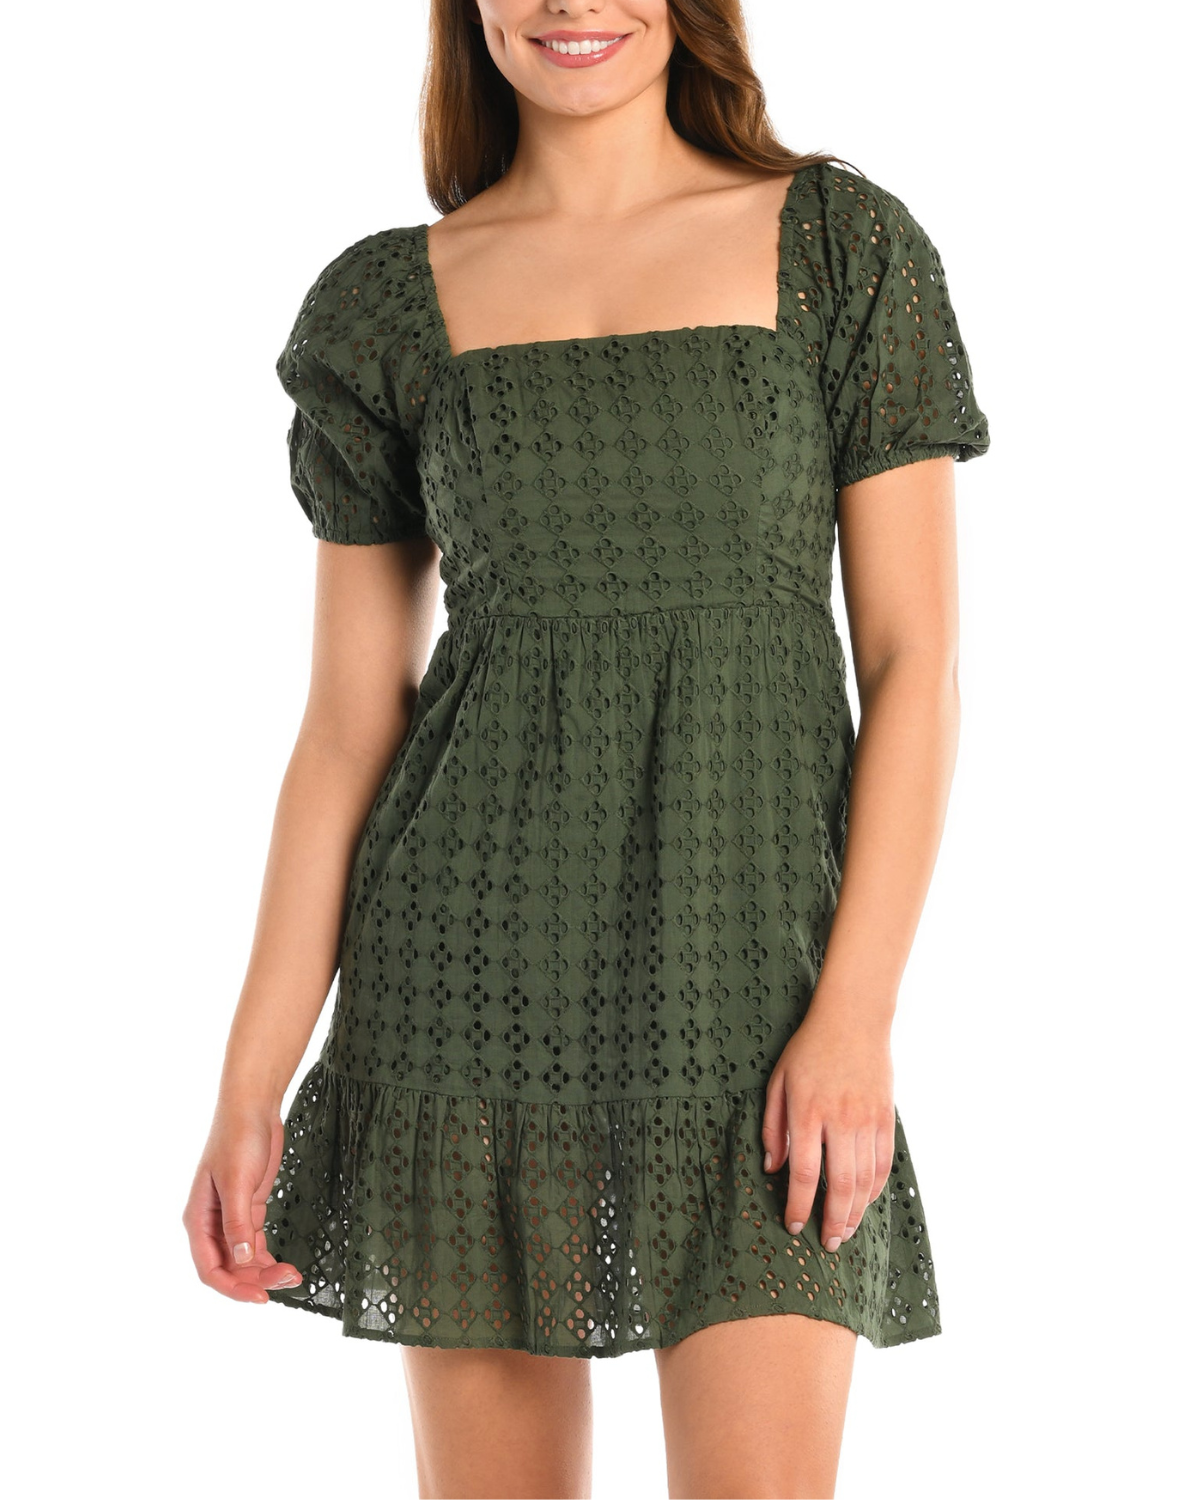 Model wearing a short sleeve cover up dress in forest green